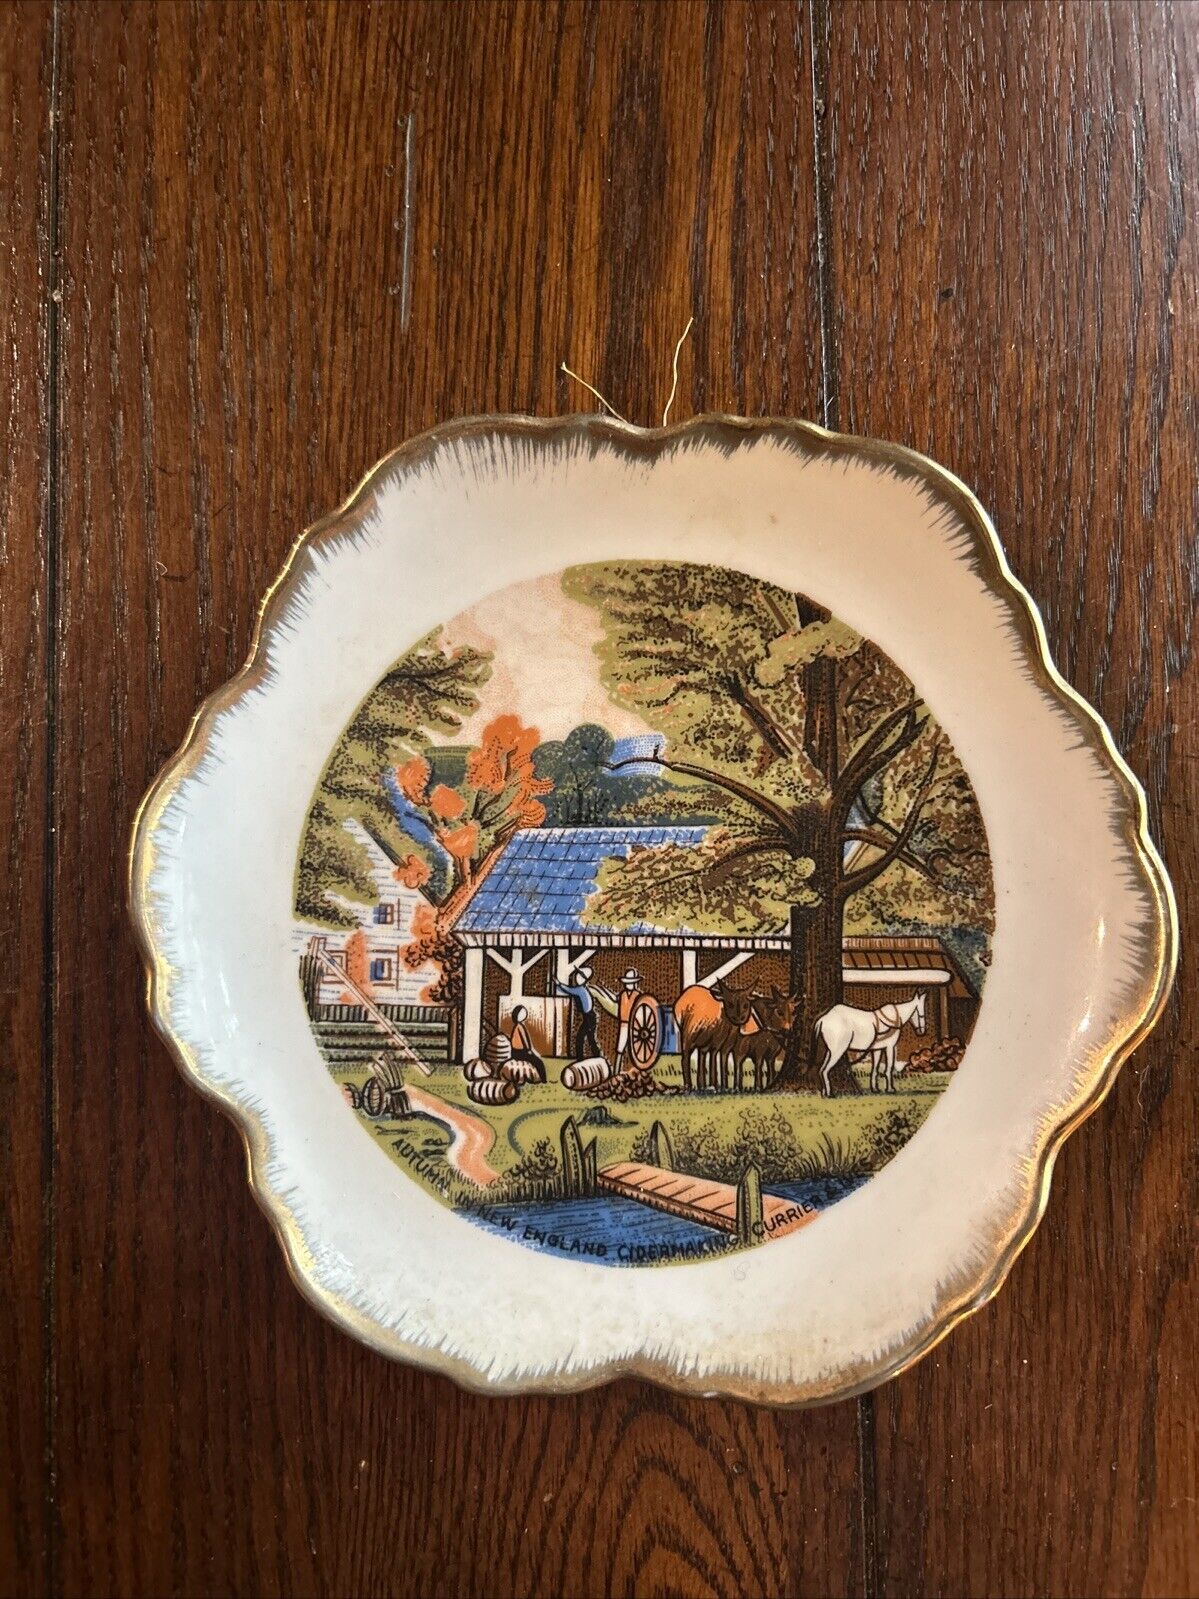 Vintage Collectible 4 Currier & Ives Season Plates - Golden Apricot